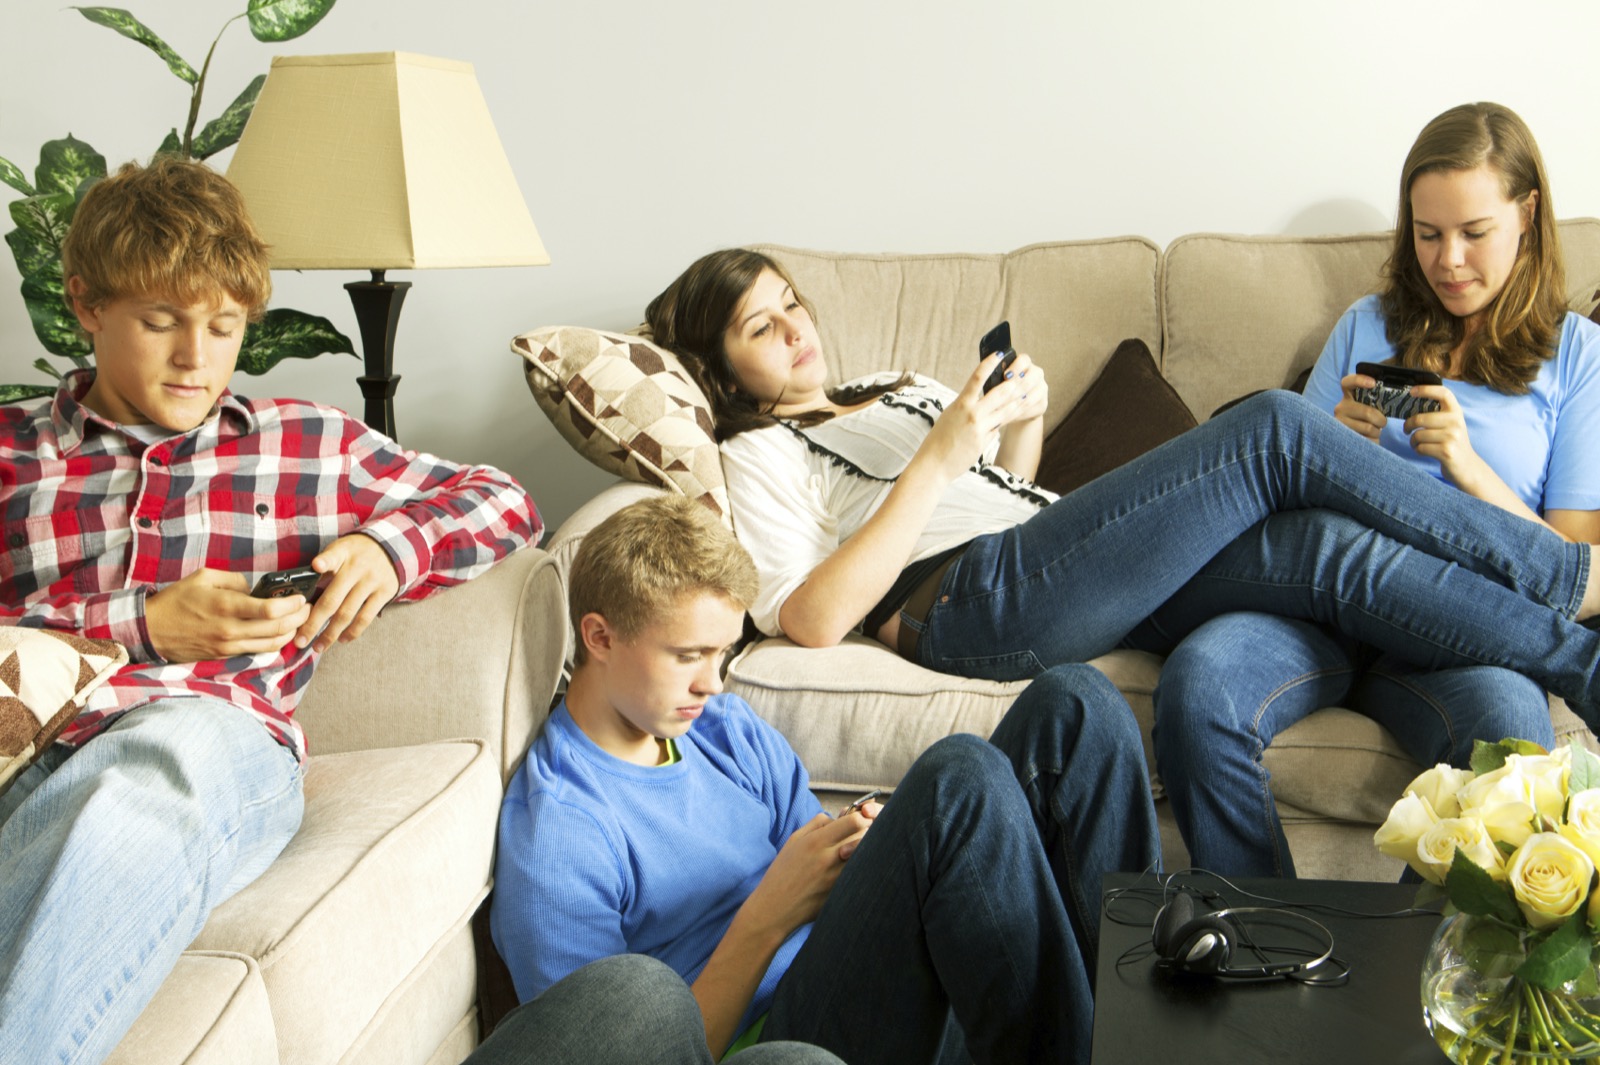 Am I Addicted To My Phone? Quiz Teenagers Texting On Mobile Phones In A Home Setting